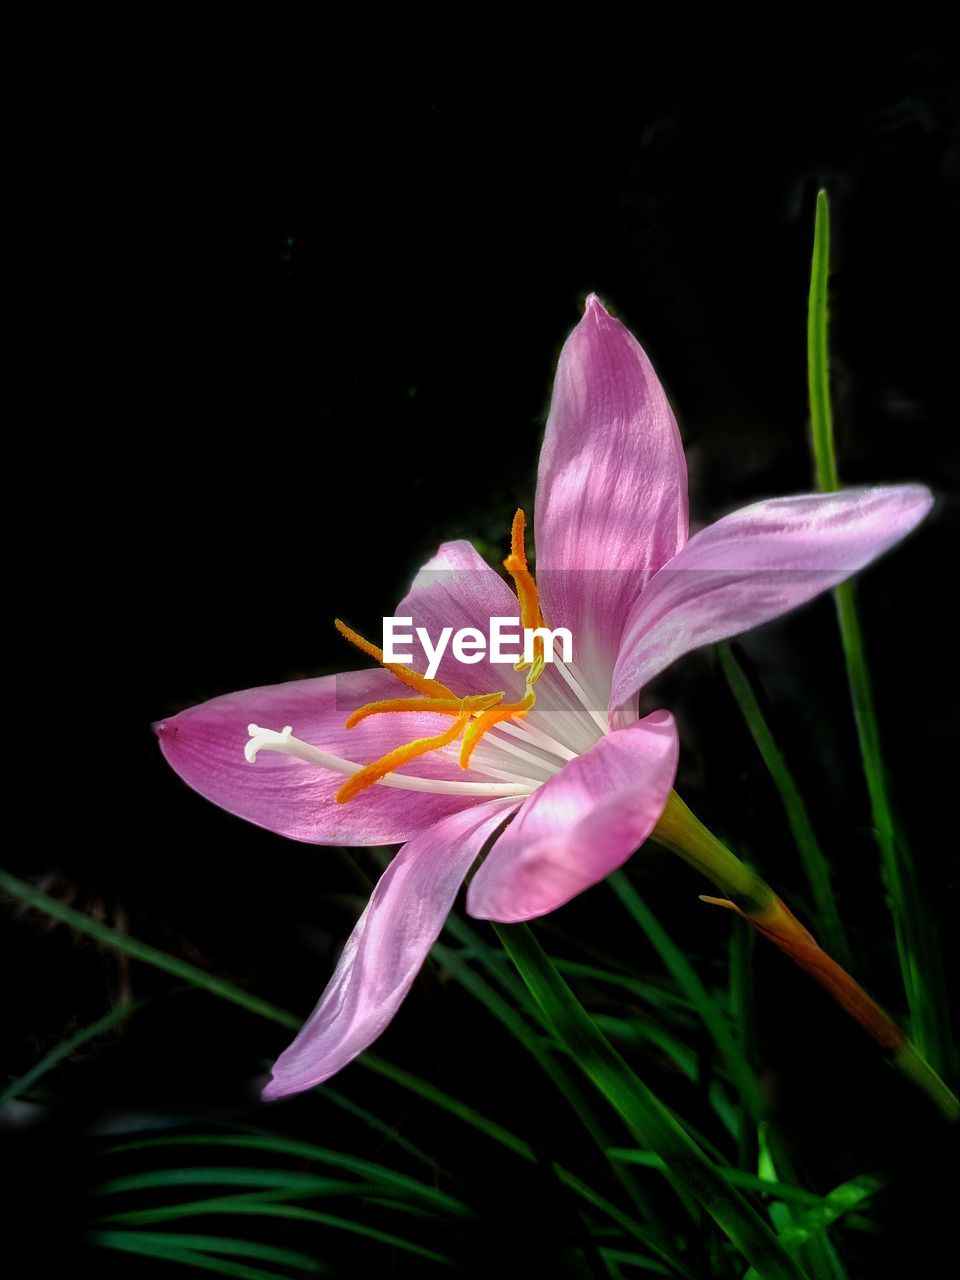 CLOSE-UP OF PINK LILY BLOOMING IN BLACK BACKGROUND